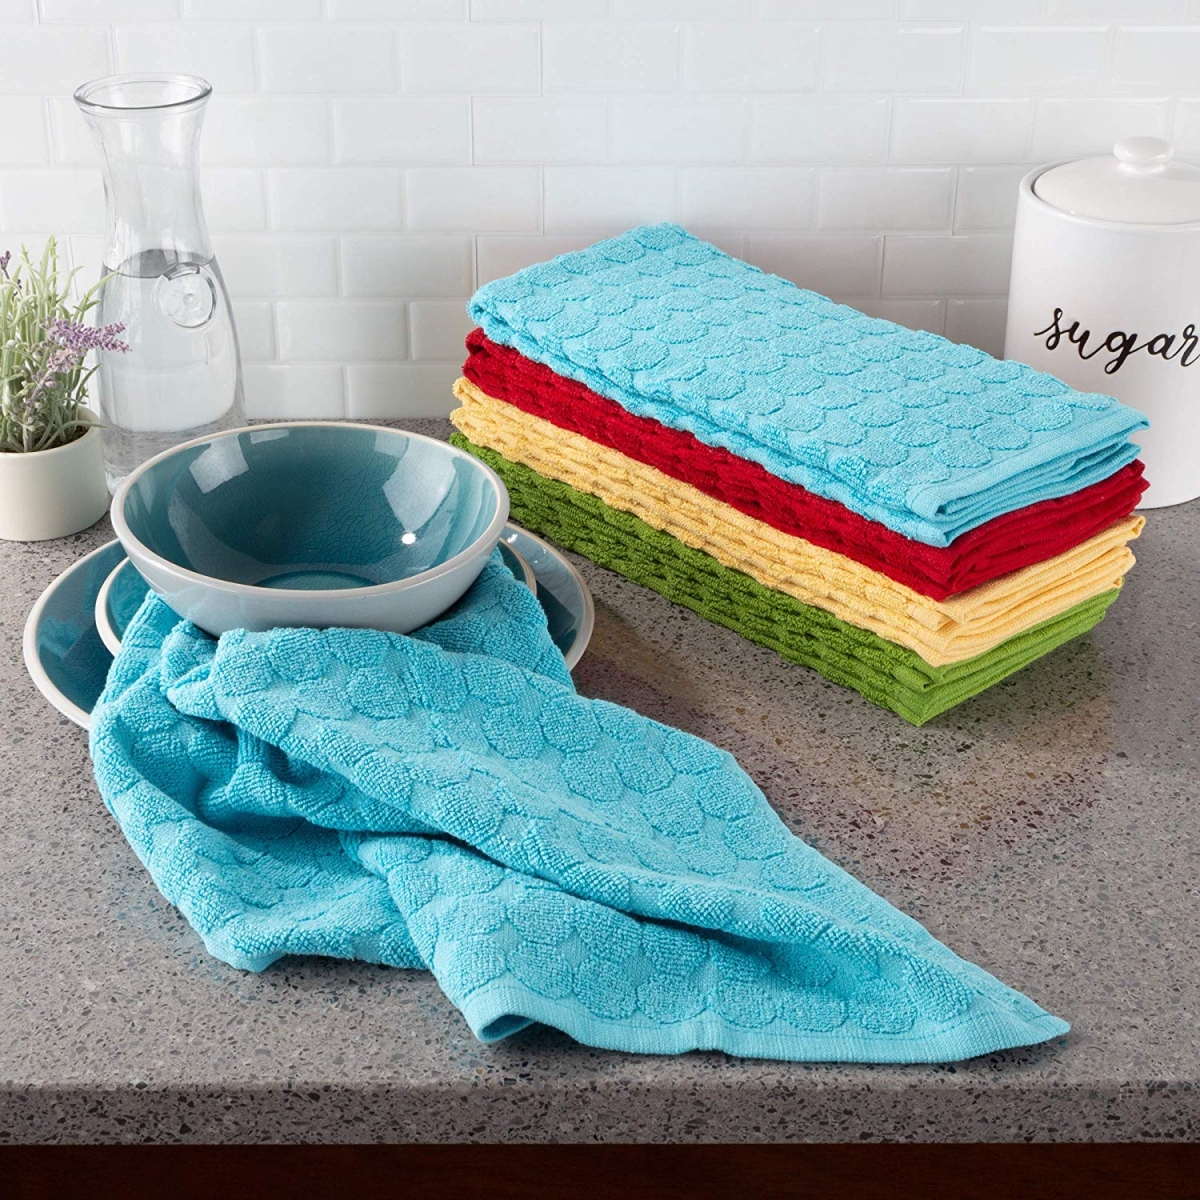 69a-39314 16 X 28 In. Home Kitchen Towels, Multi-color - Set Of 8